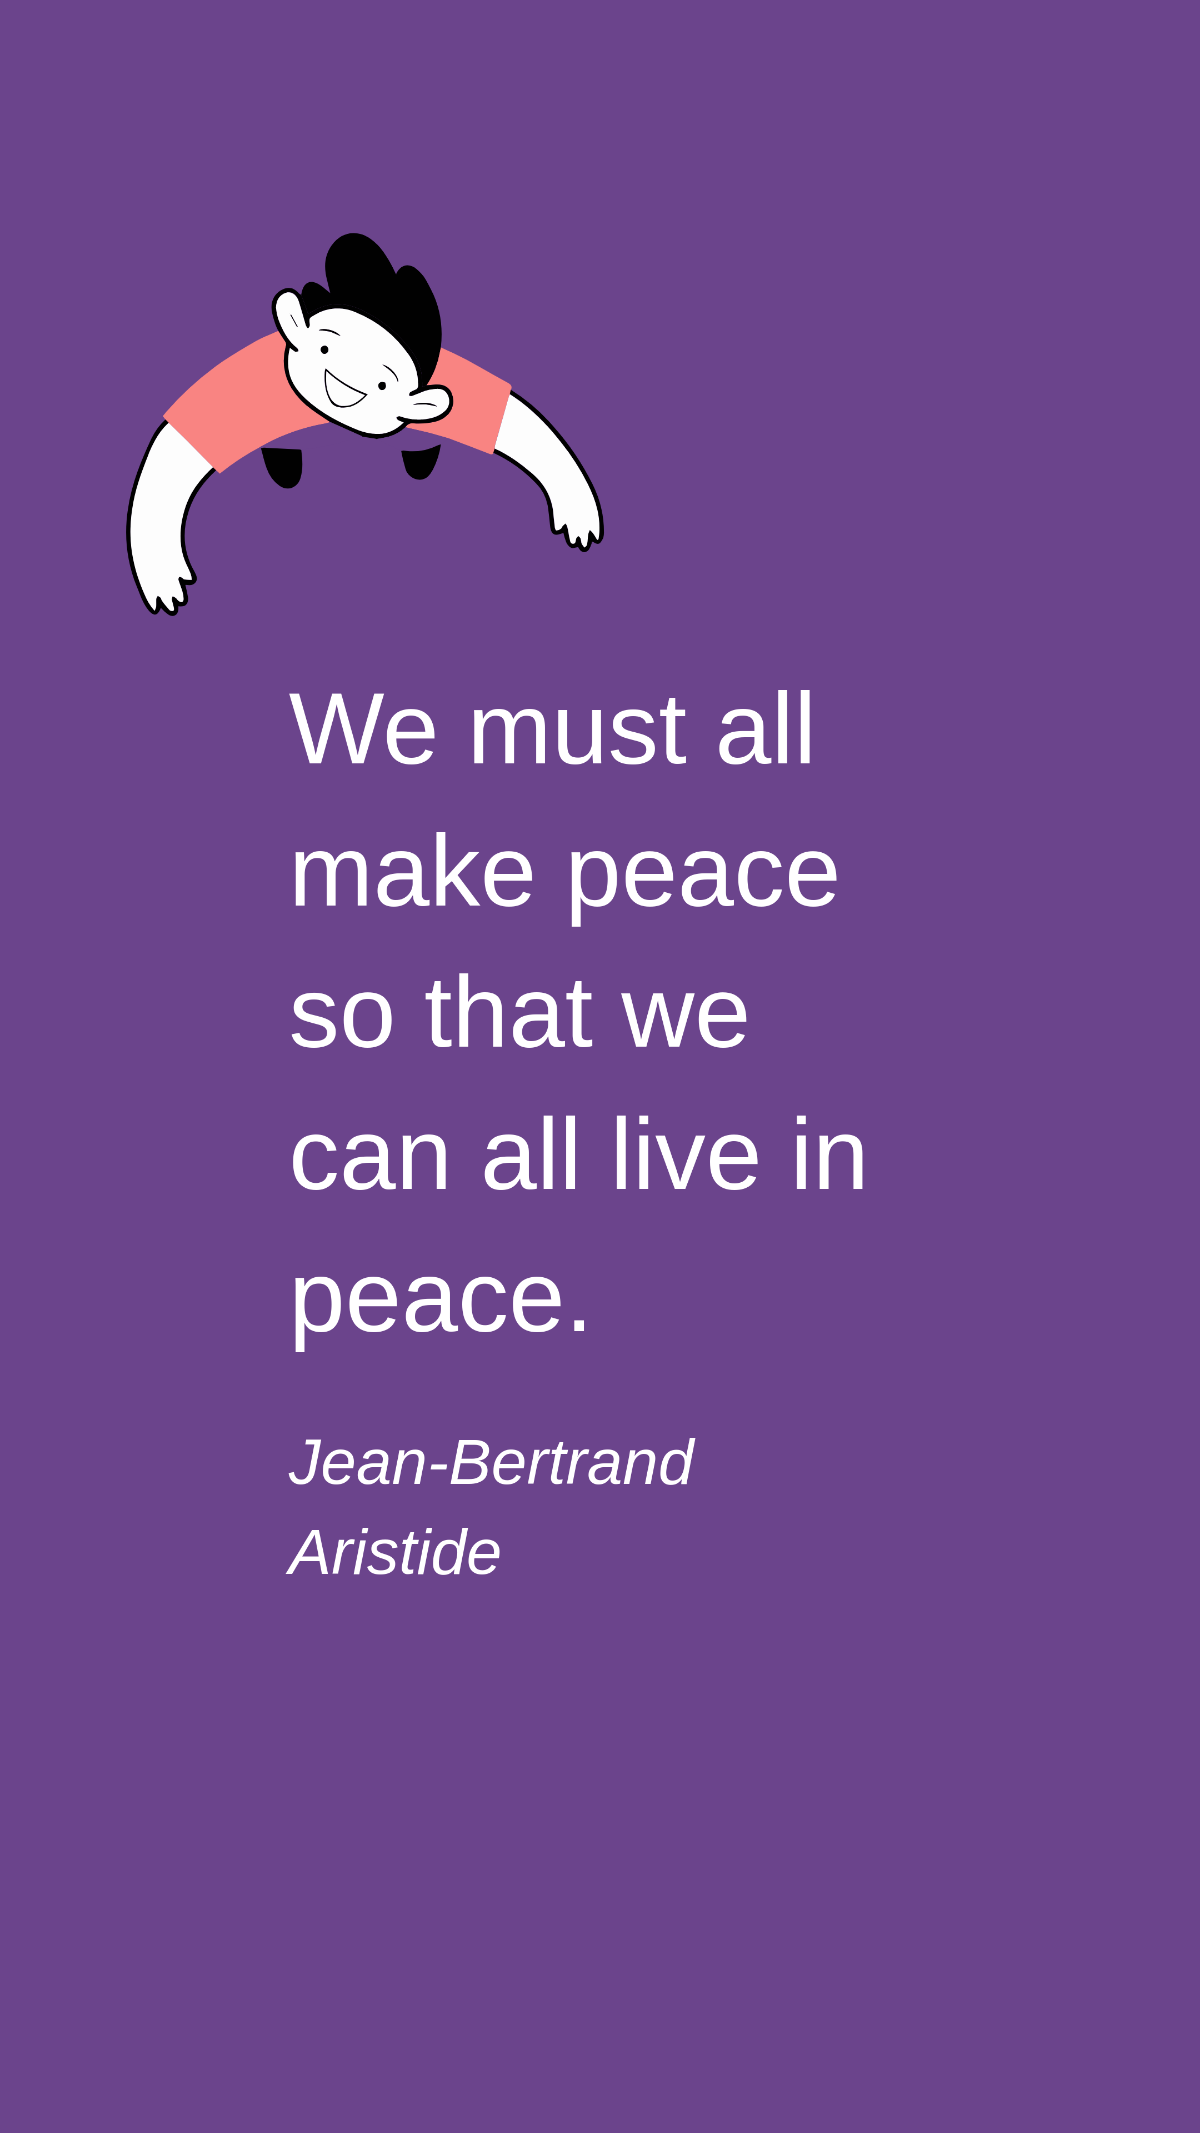 Jean-Bertrand Aristide - We must all make peace so that we can all live in peace. Template